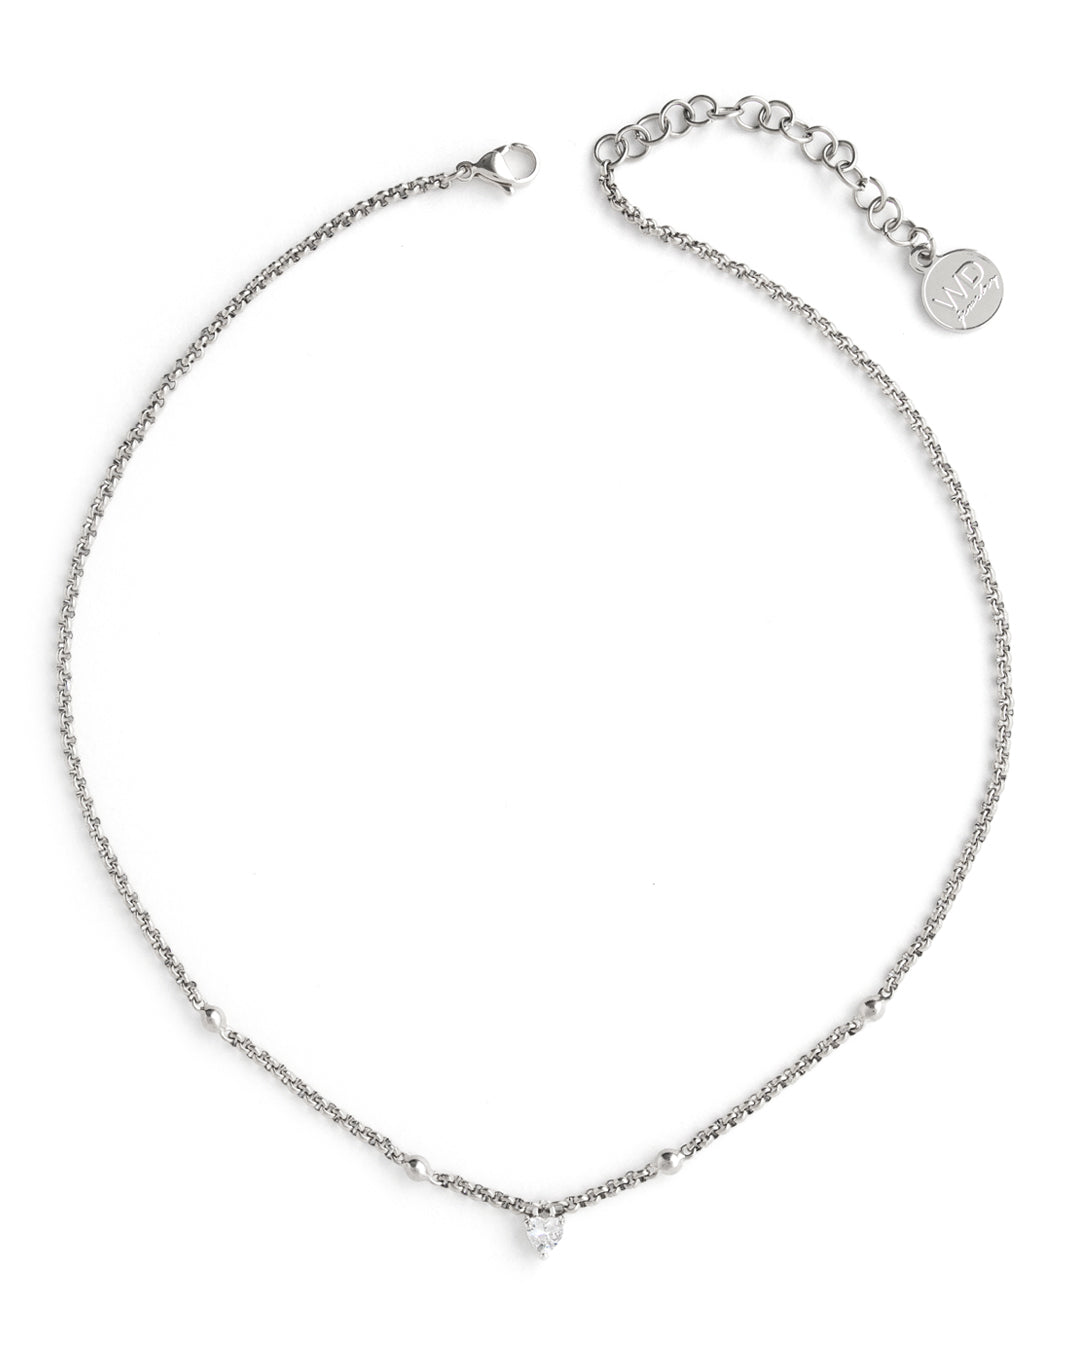 Luvo Silver Necklace